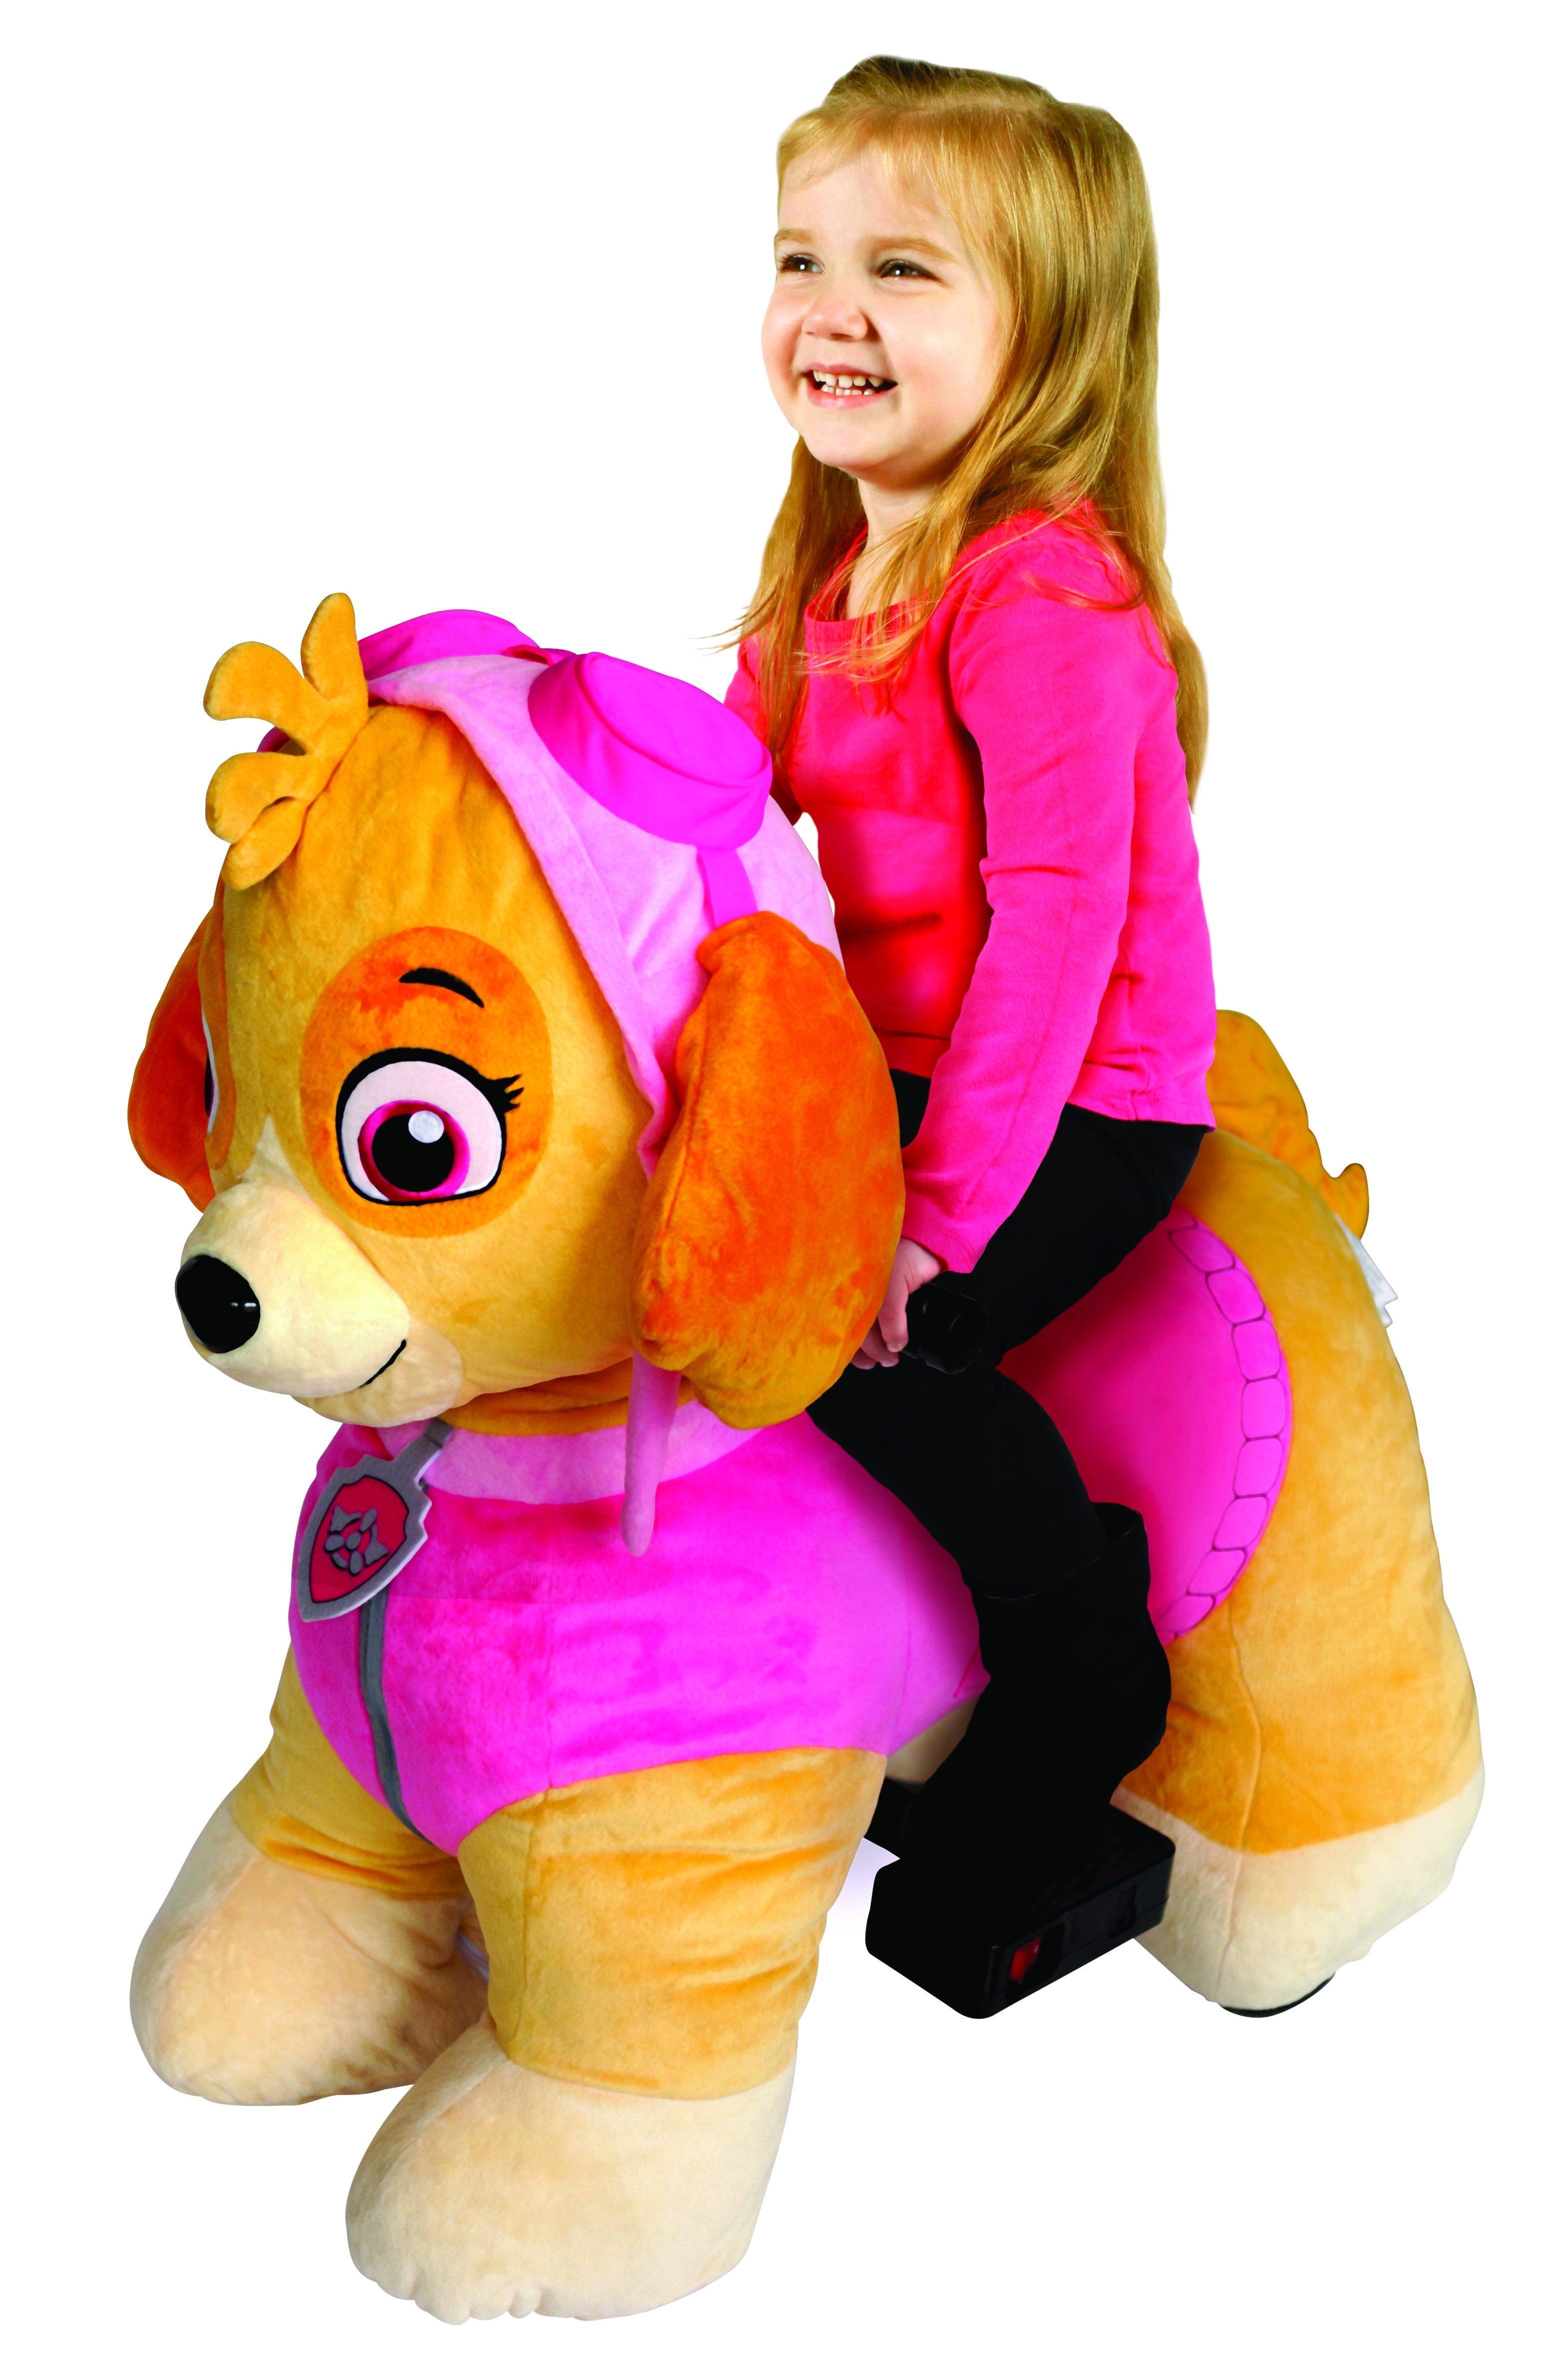 Paw Patrol 6 Volt Plush Skye Ride-on with Pup House Included by Dynacraft!  